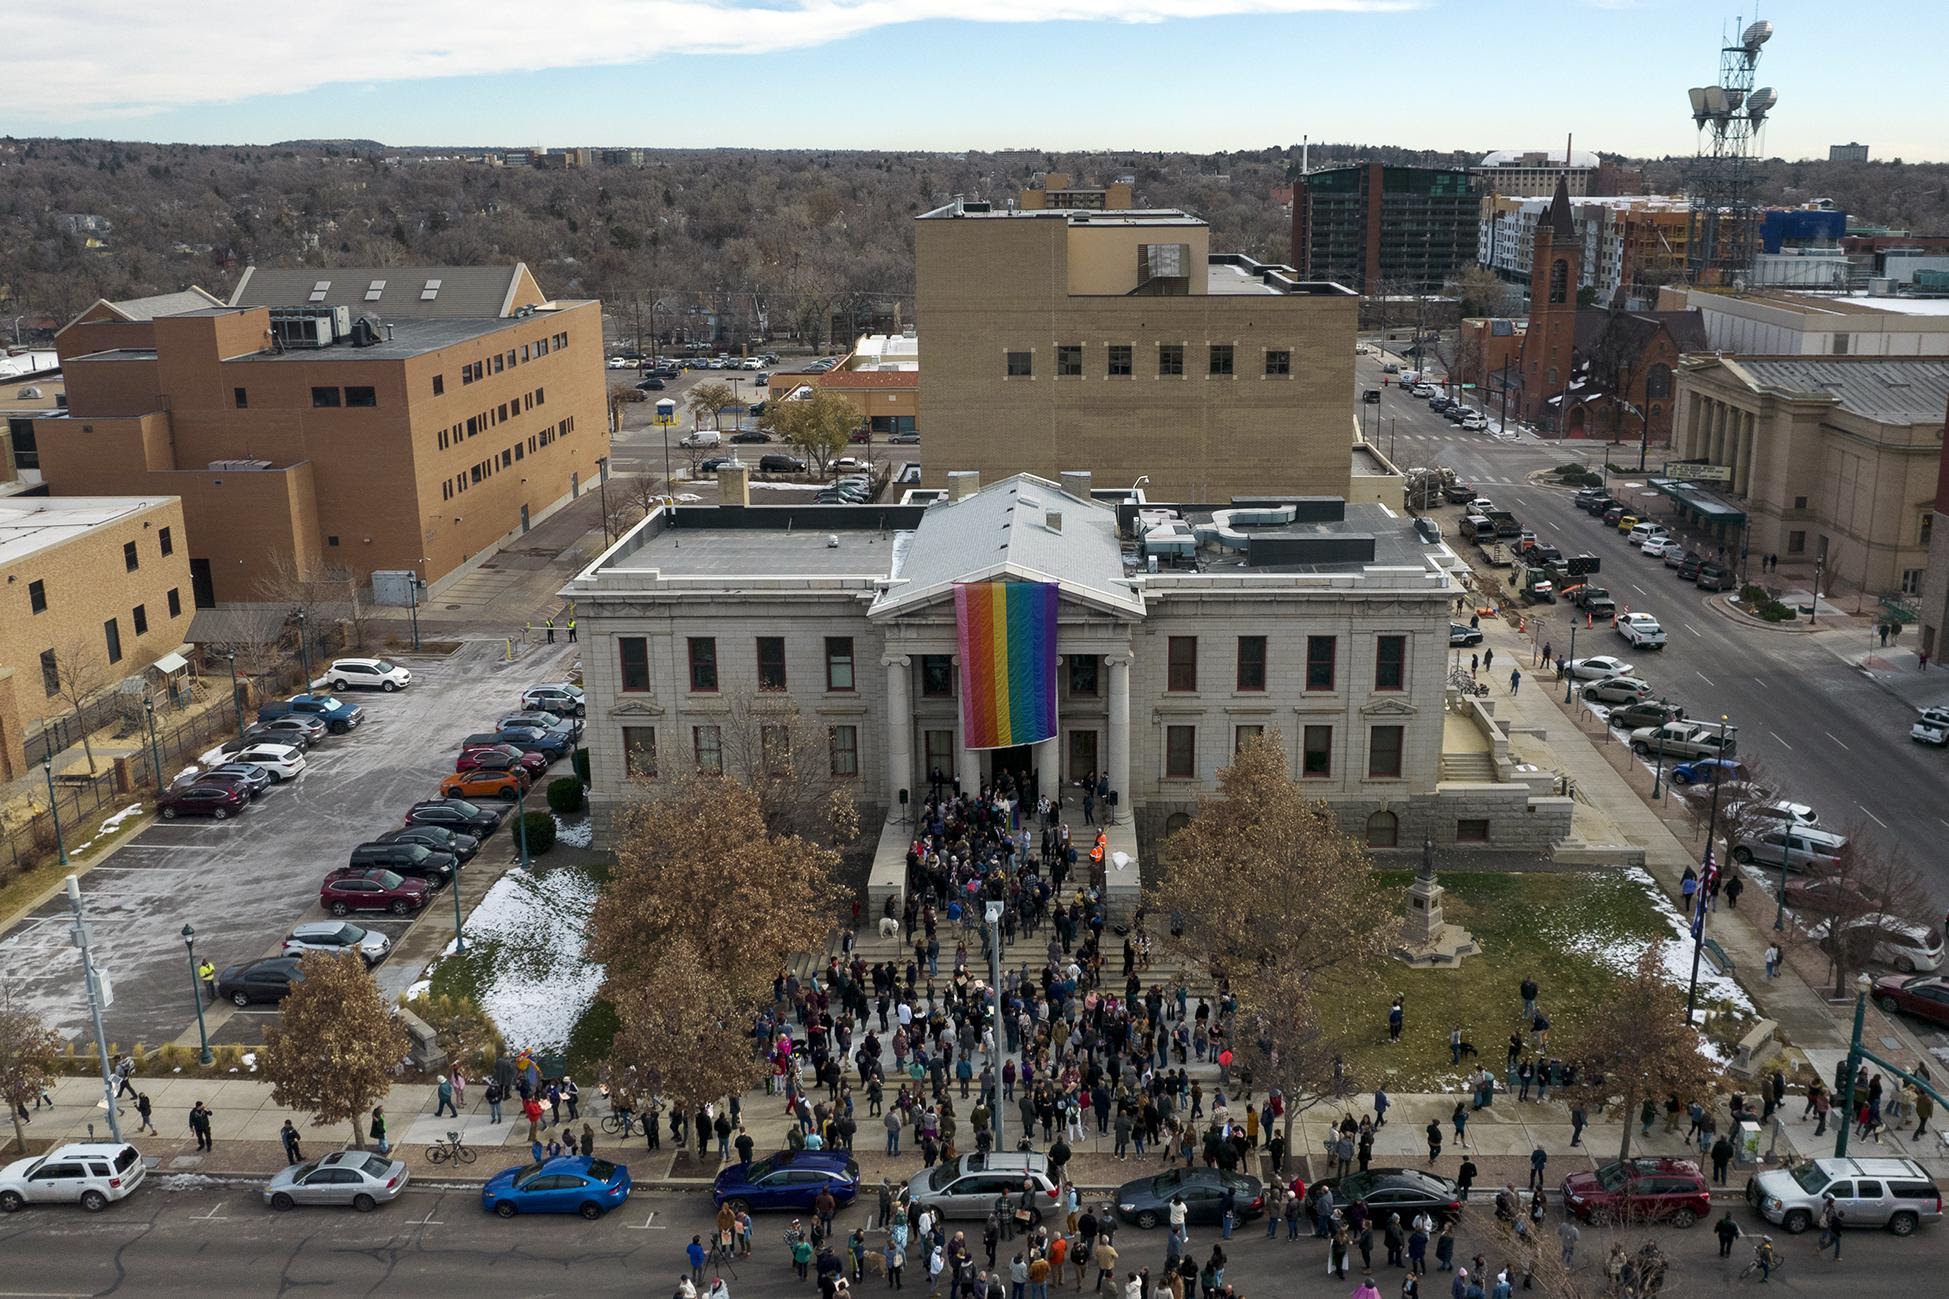 Colorado Springs reckons with past after gay club shooting